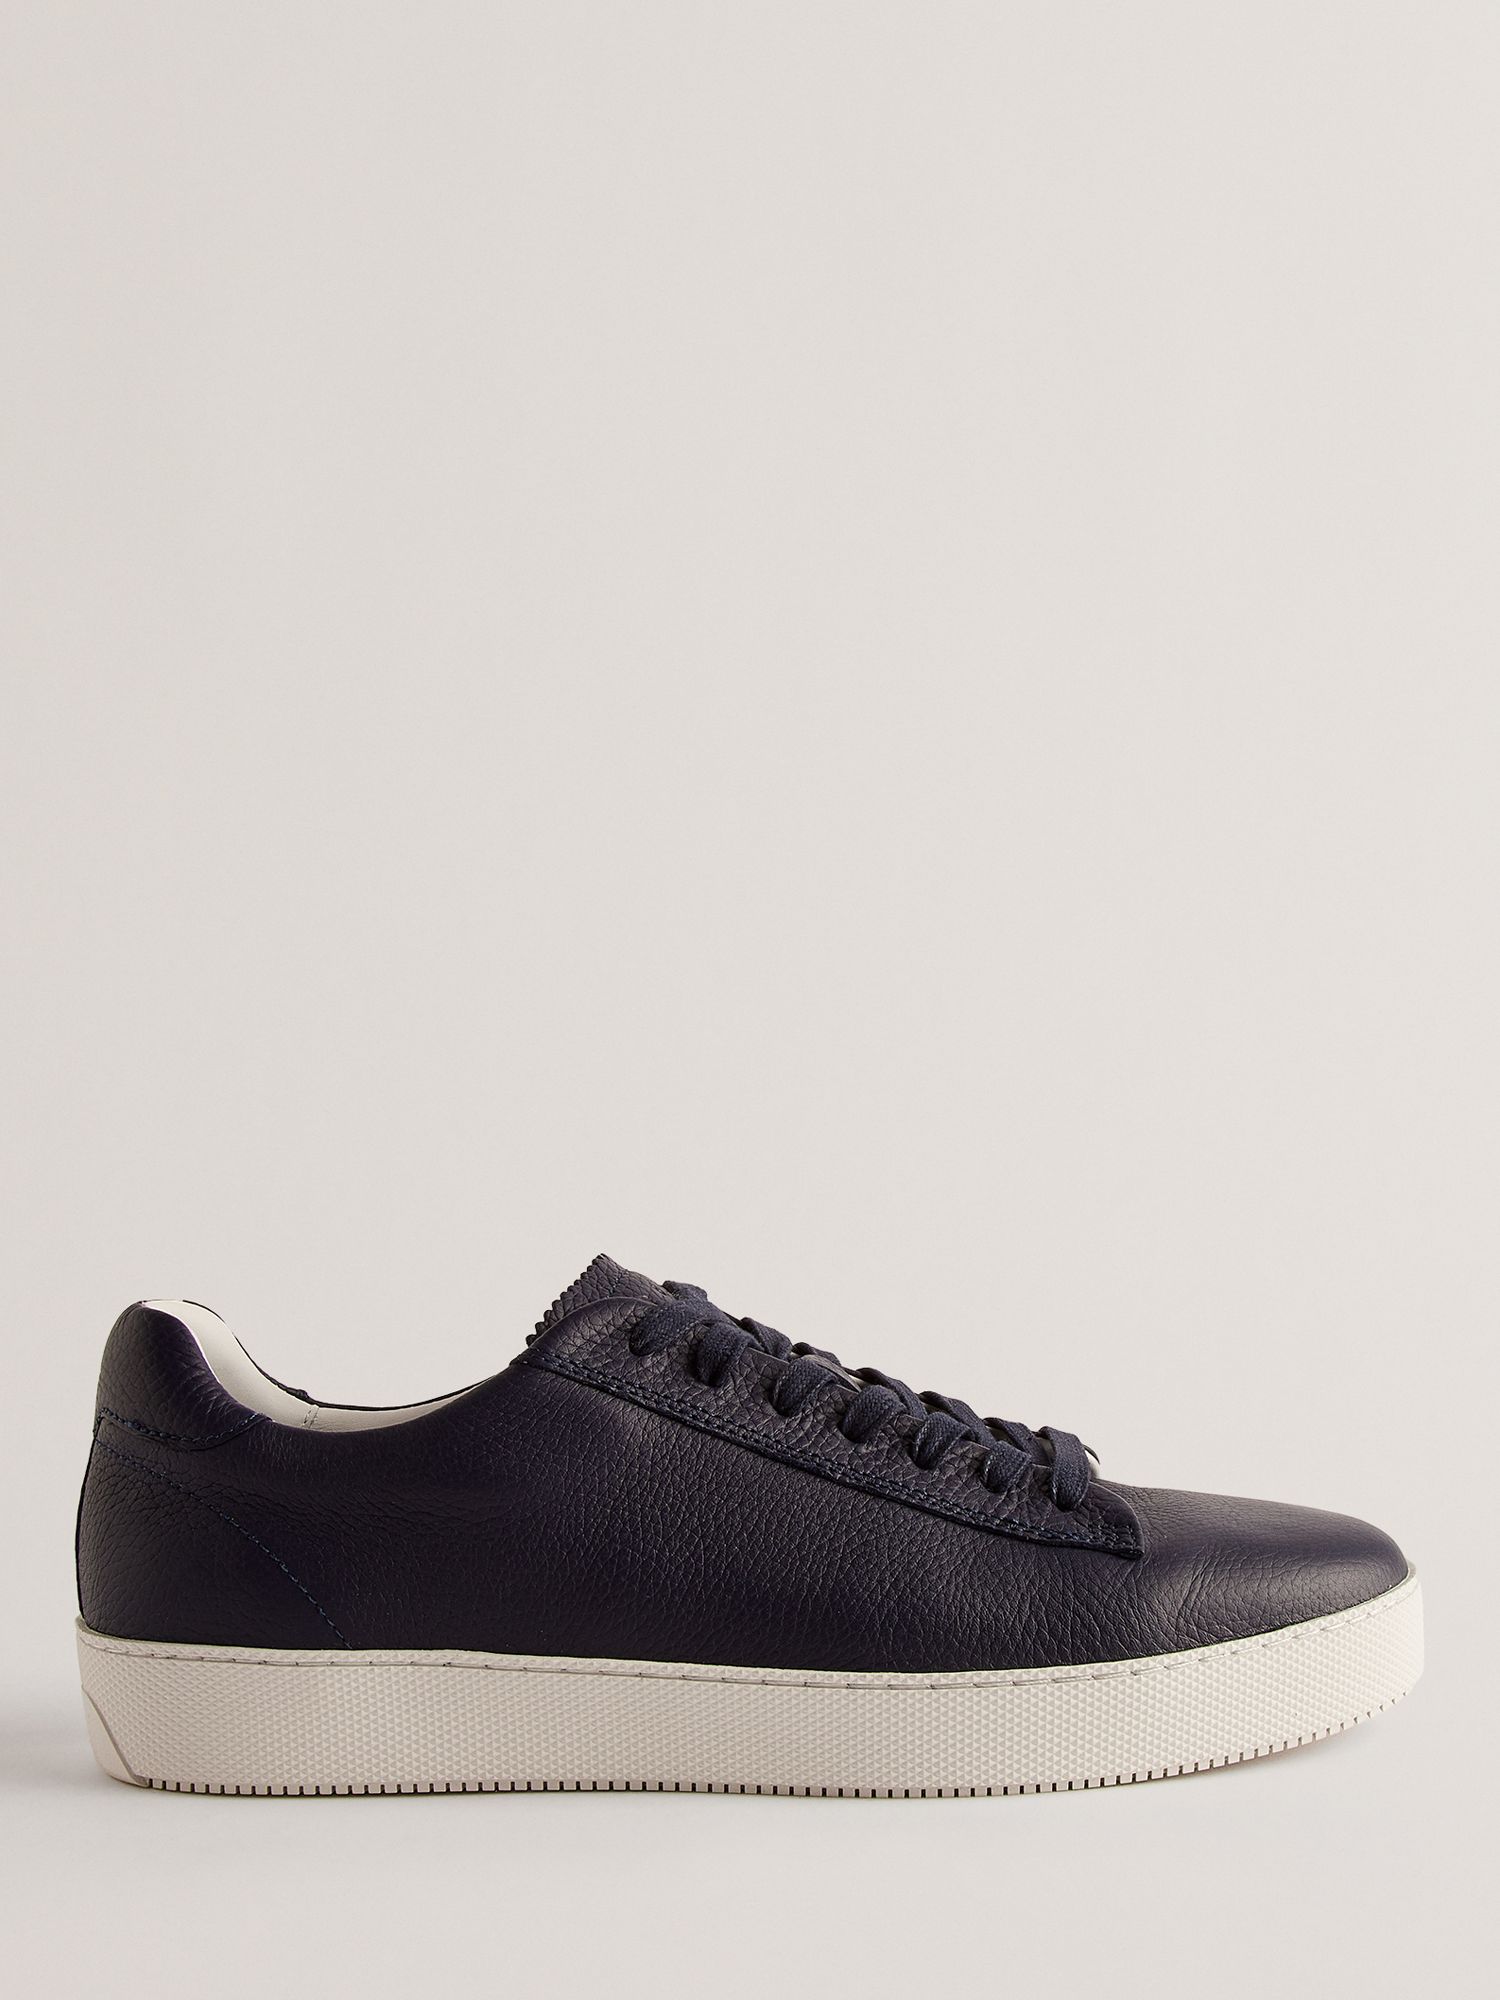 Ted Baker Leather Pebble Trainers, Navy at John Lewis & Partners